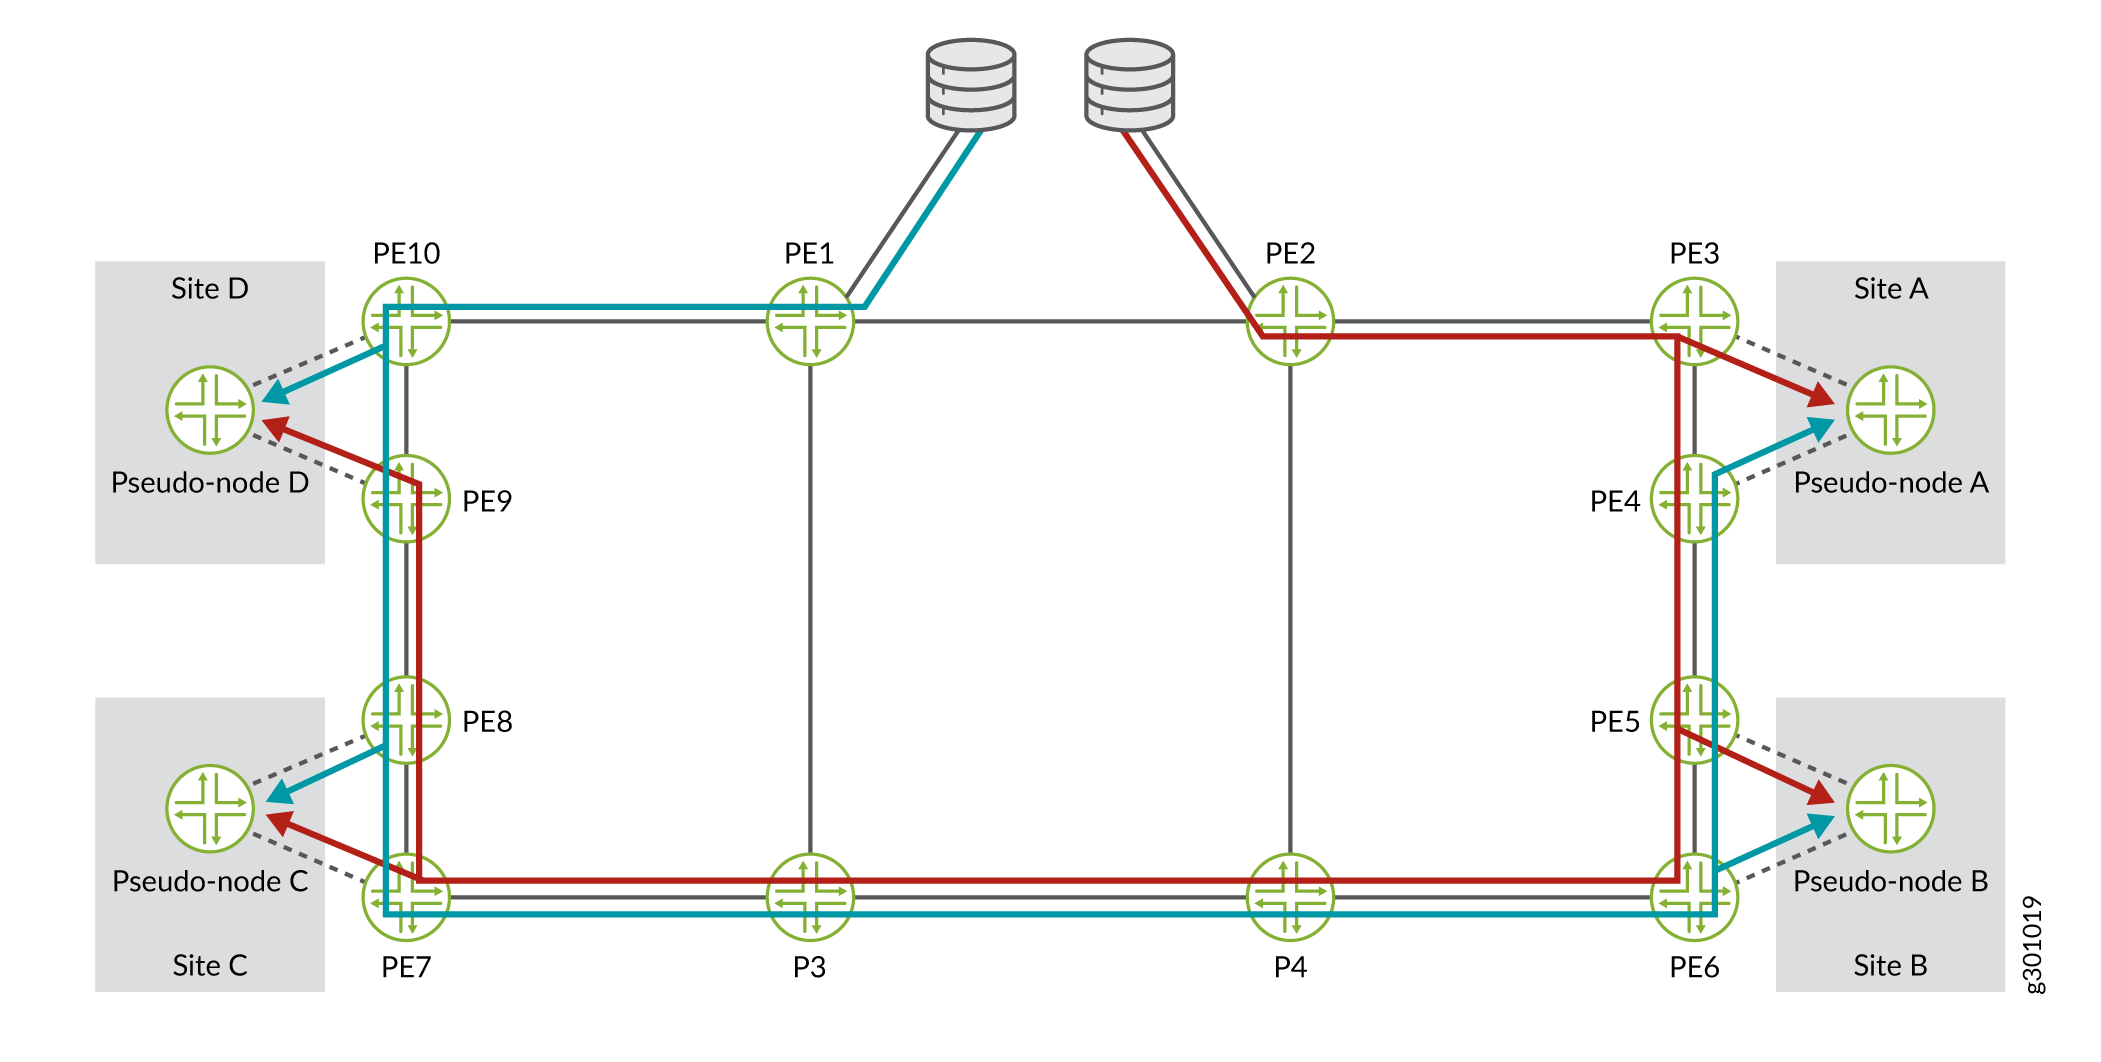 Diverse PE to CE Links Topology with Redundant Data Streams